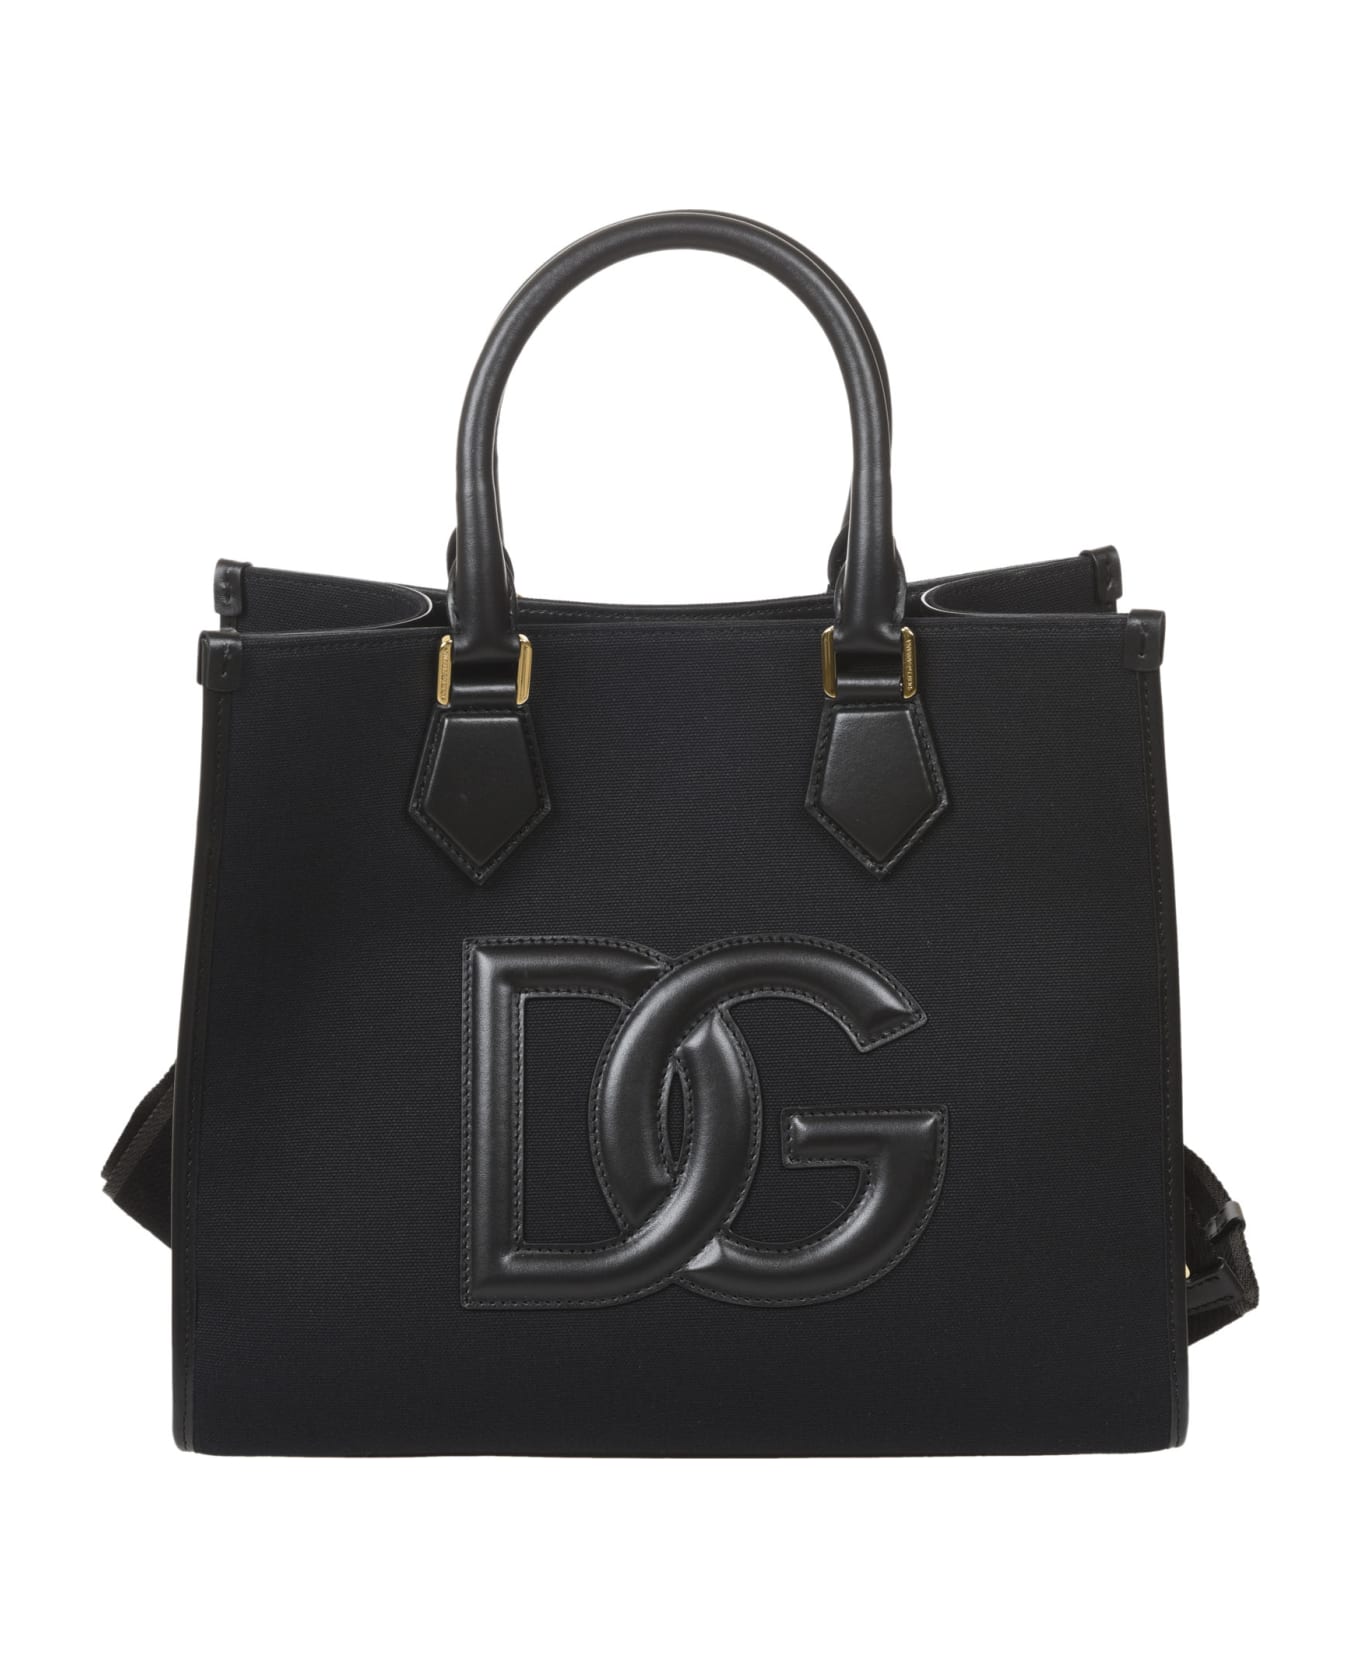 Dolce & Gabbana Logo Patched Top Handle Tote - Black トートバッグ